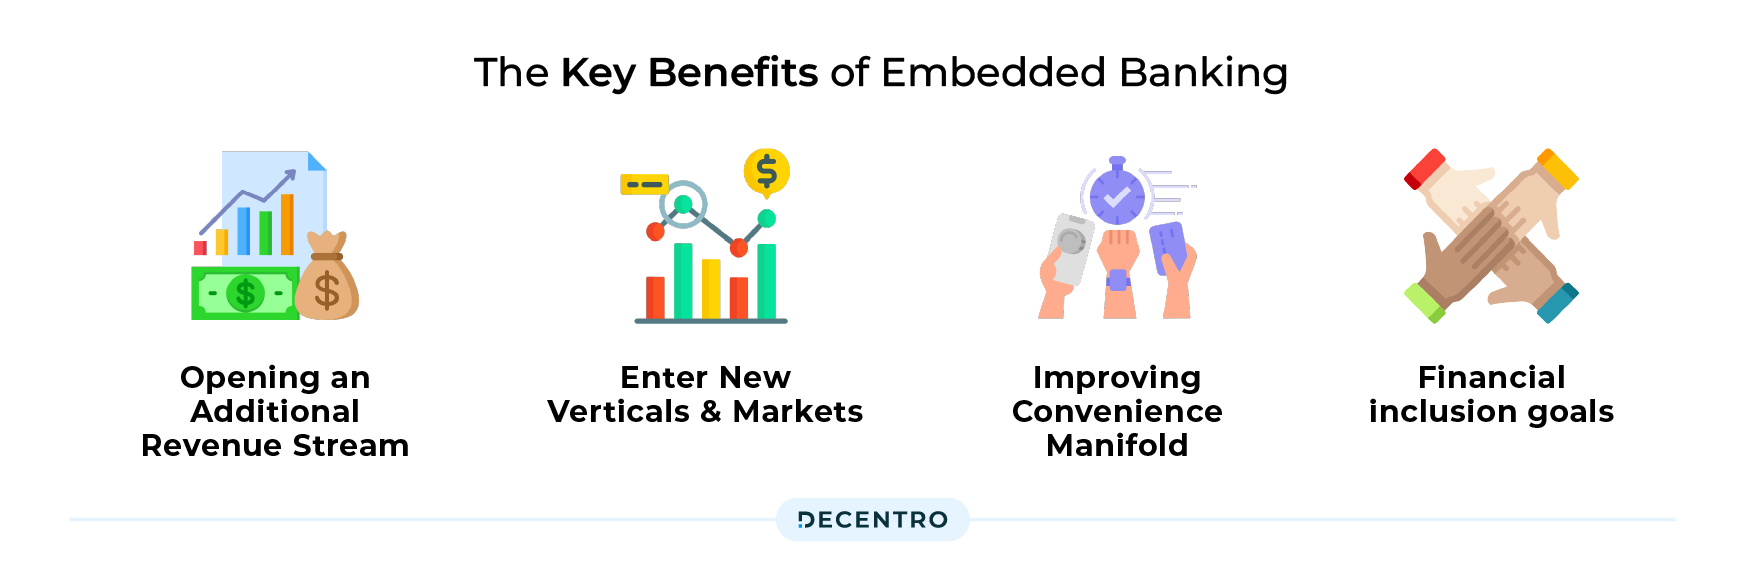 The Key Benefits of Embedded Banking